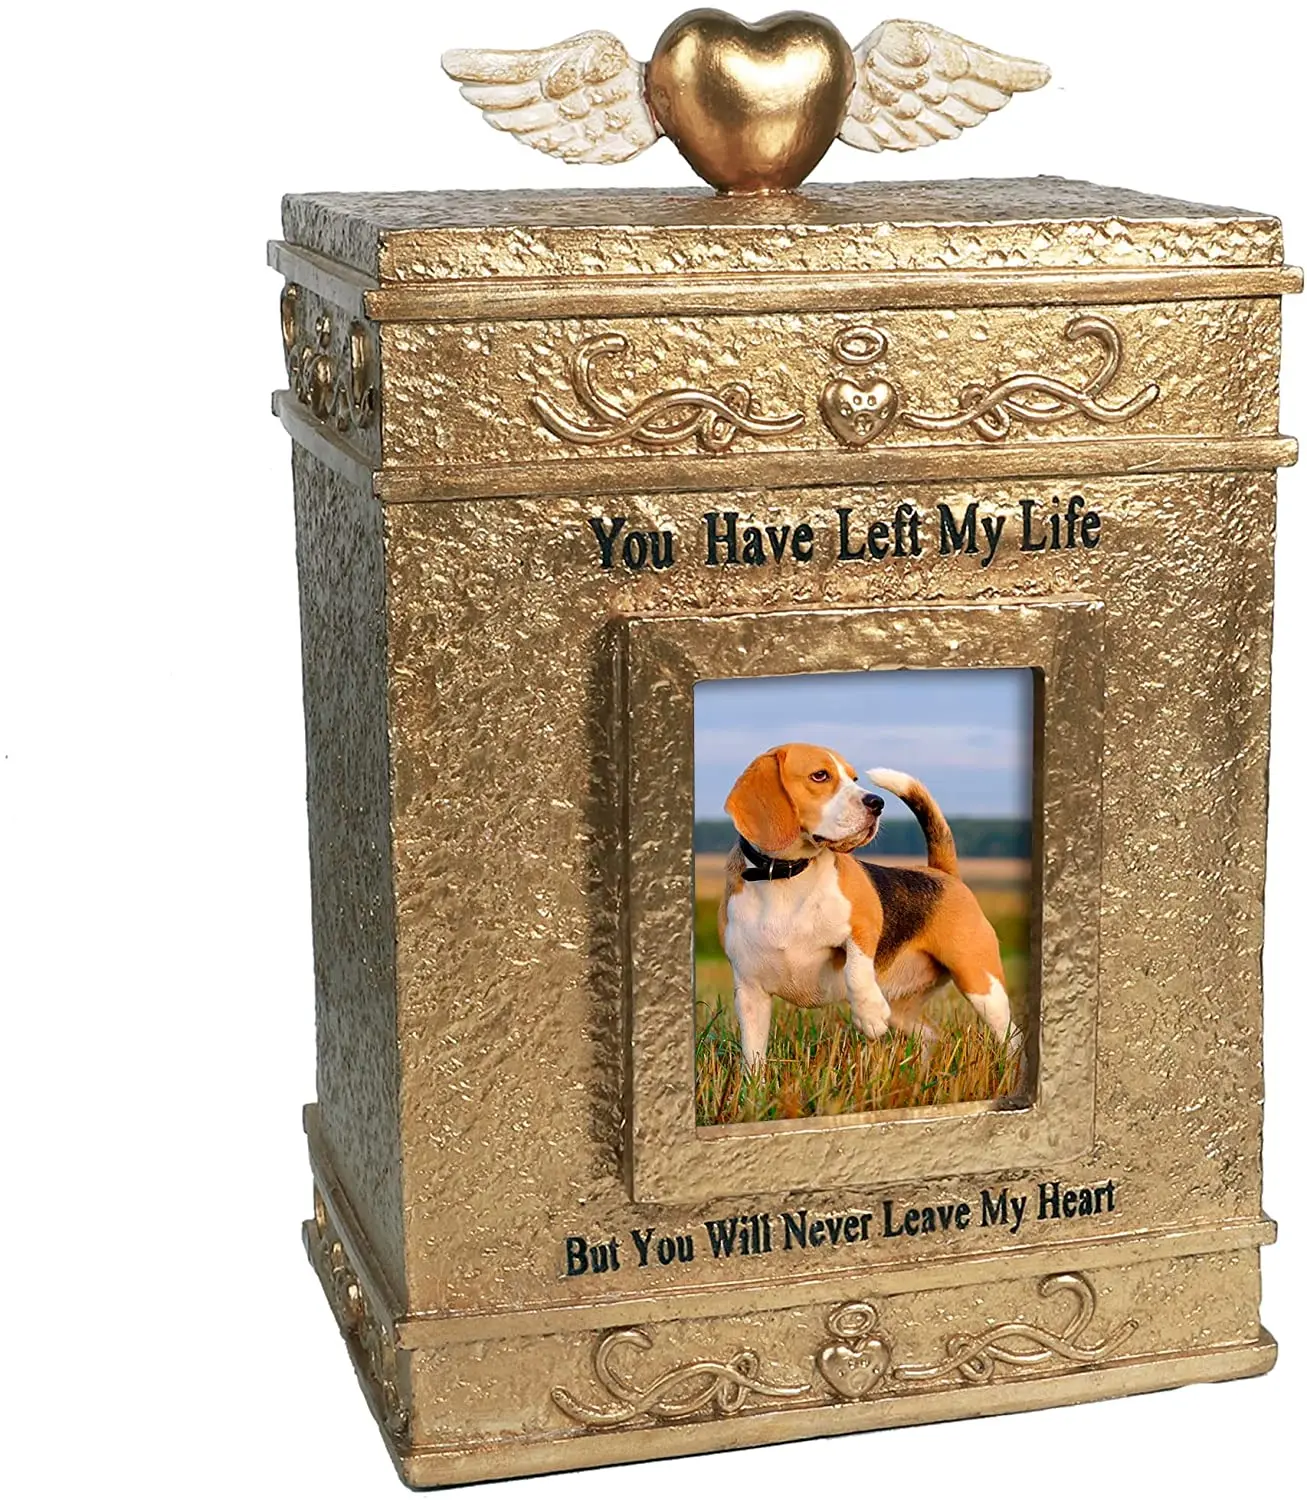 Memorial Pet Cremation Box With Photo Picture - Buy Resin Pet Urn,Pet  Cremation Box,Cremation Box With Photo Picture Product on 